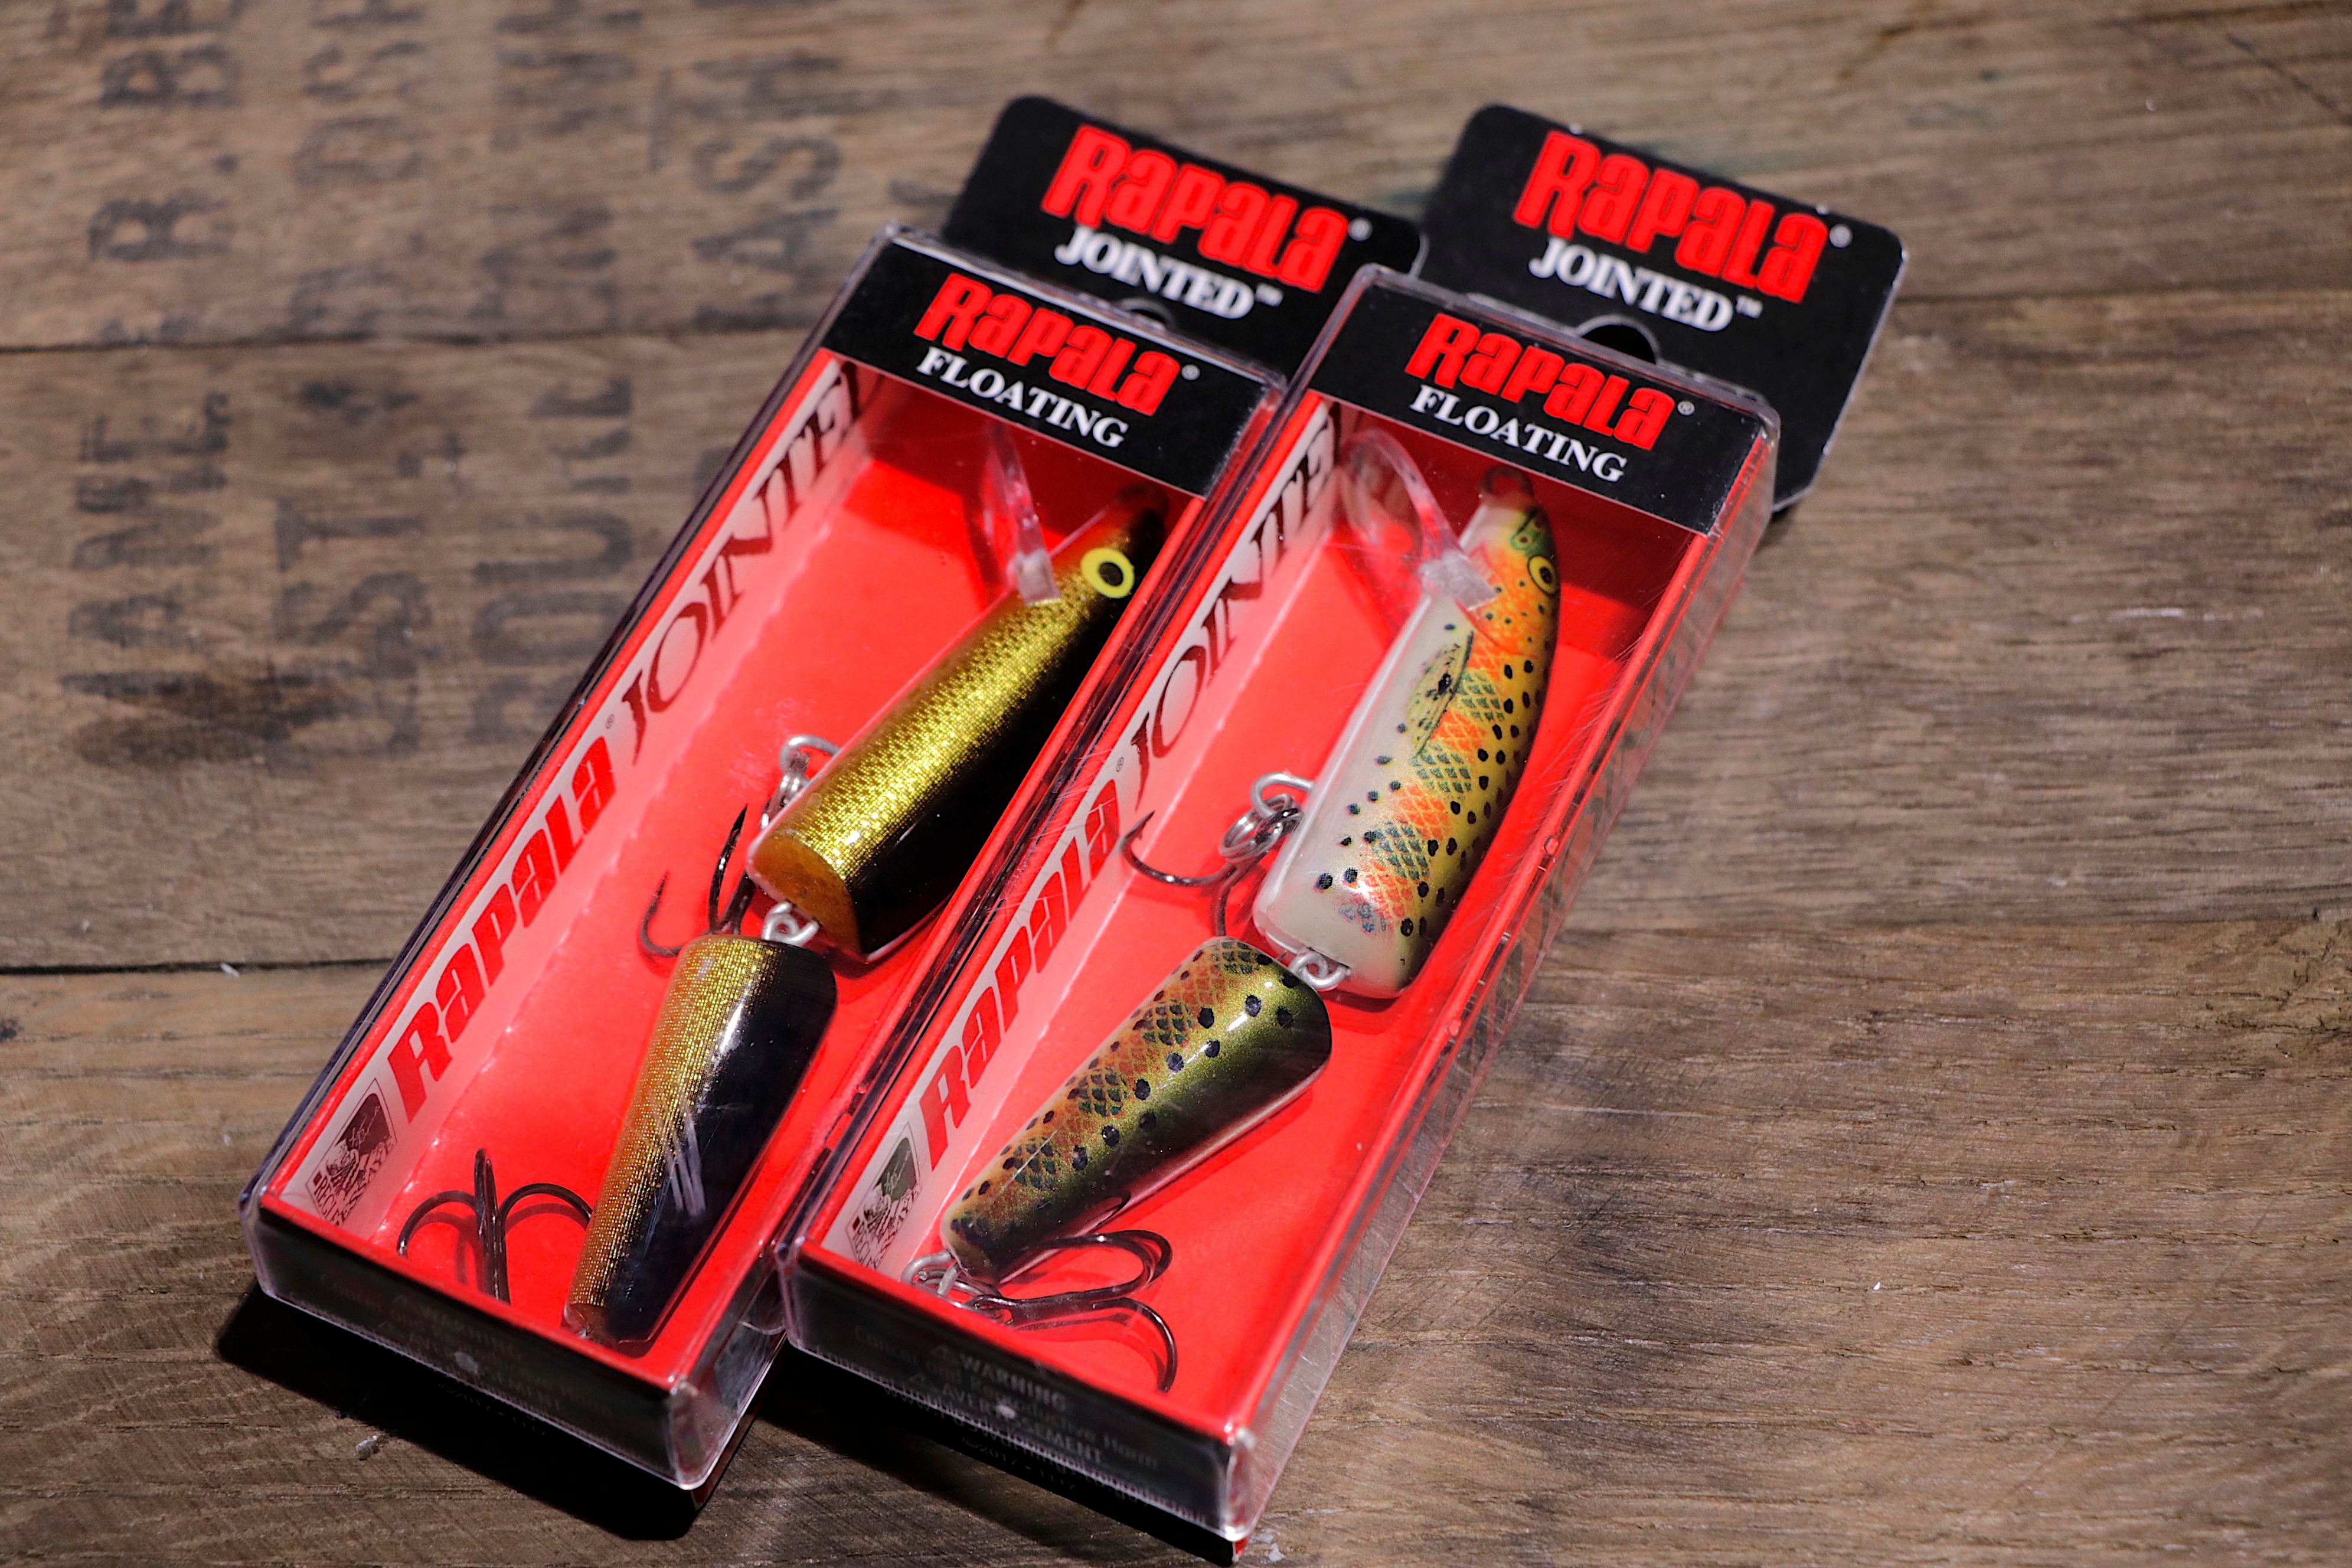 RAPALA FLOATING JOINTED 9 | JUNCTION LEATHER&RIVER SHOP powered by BASE